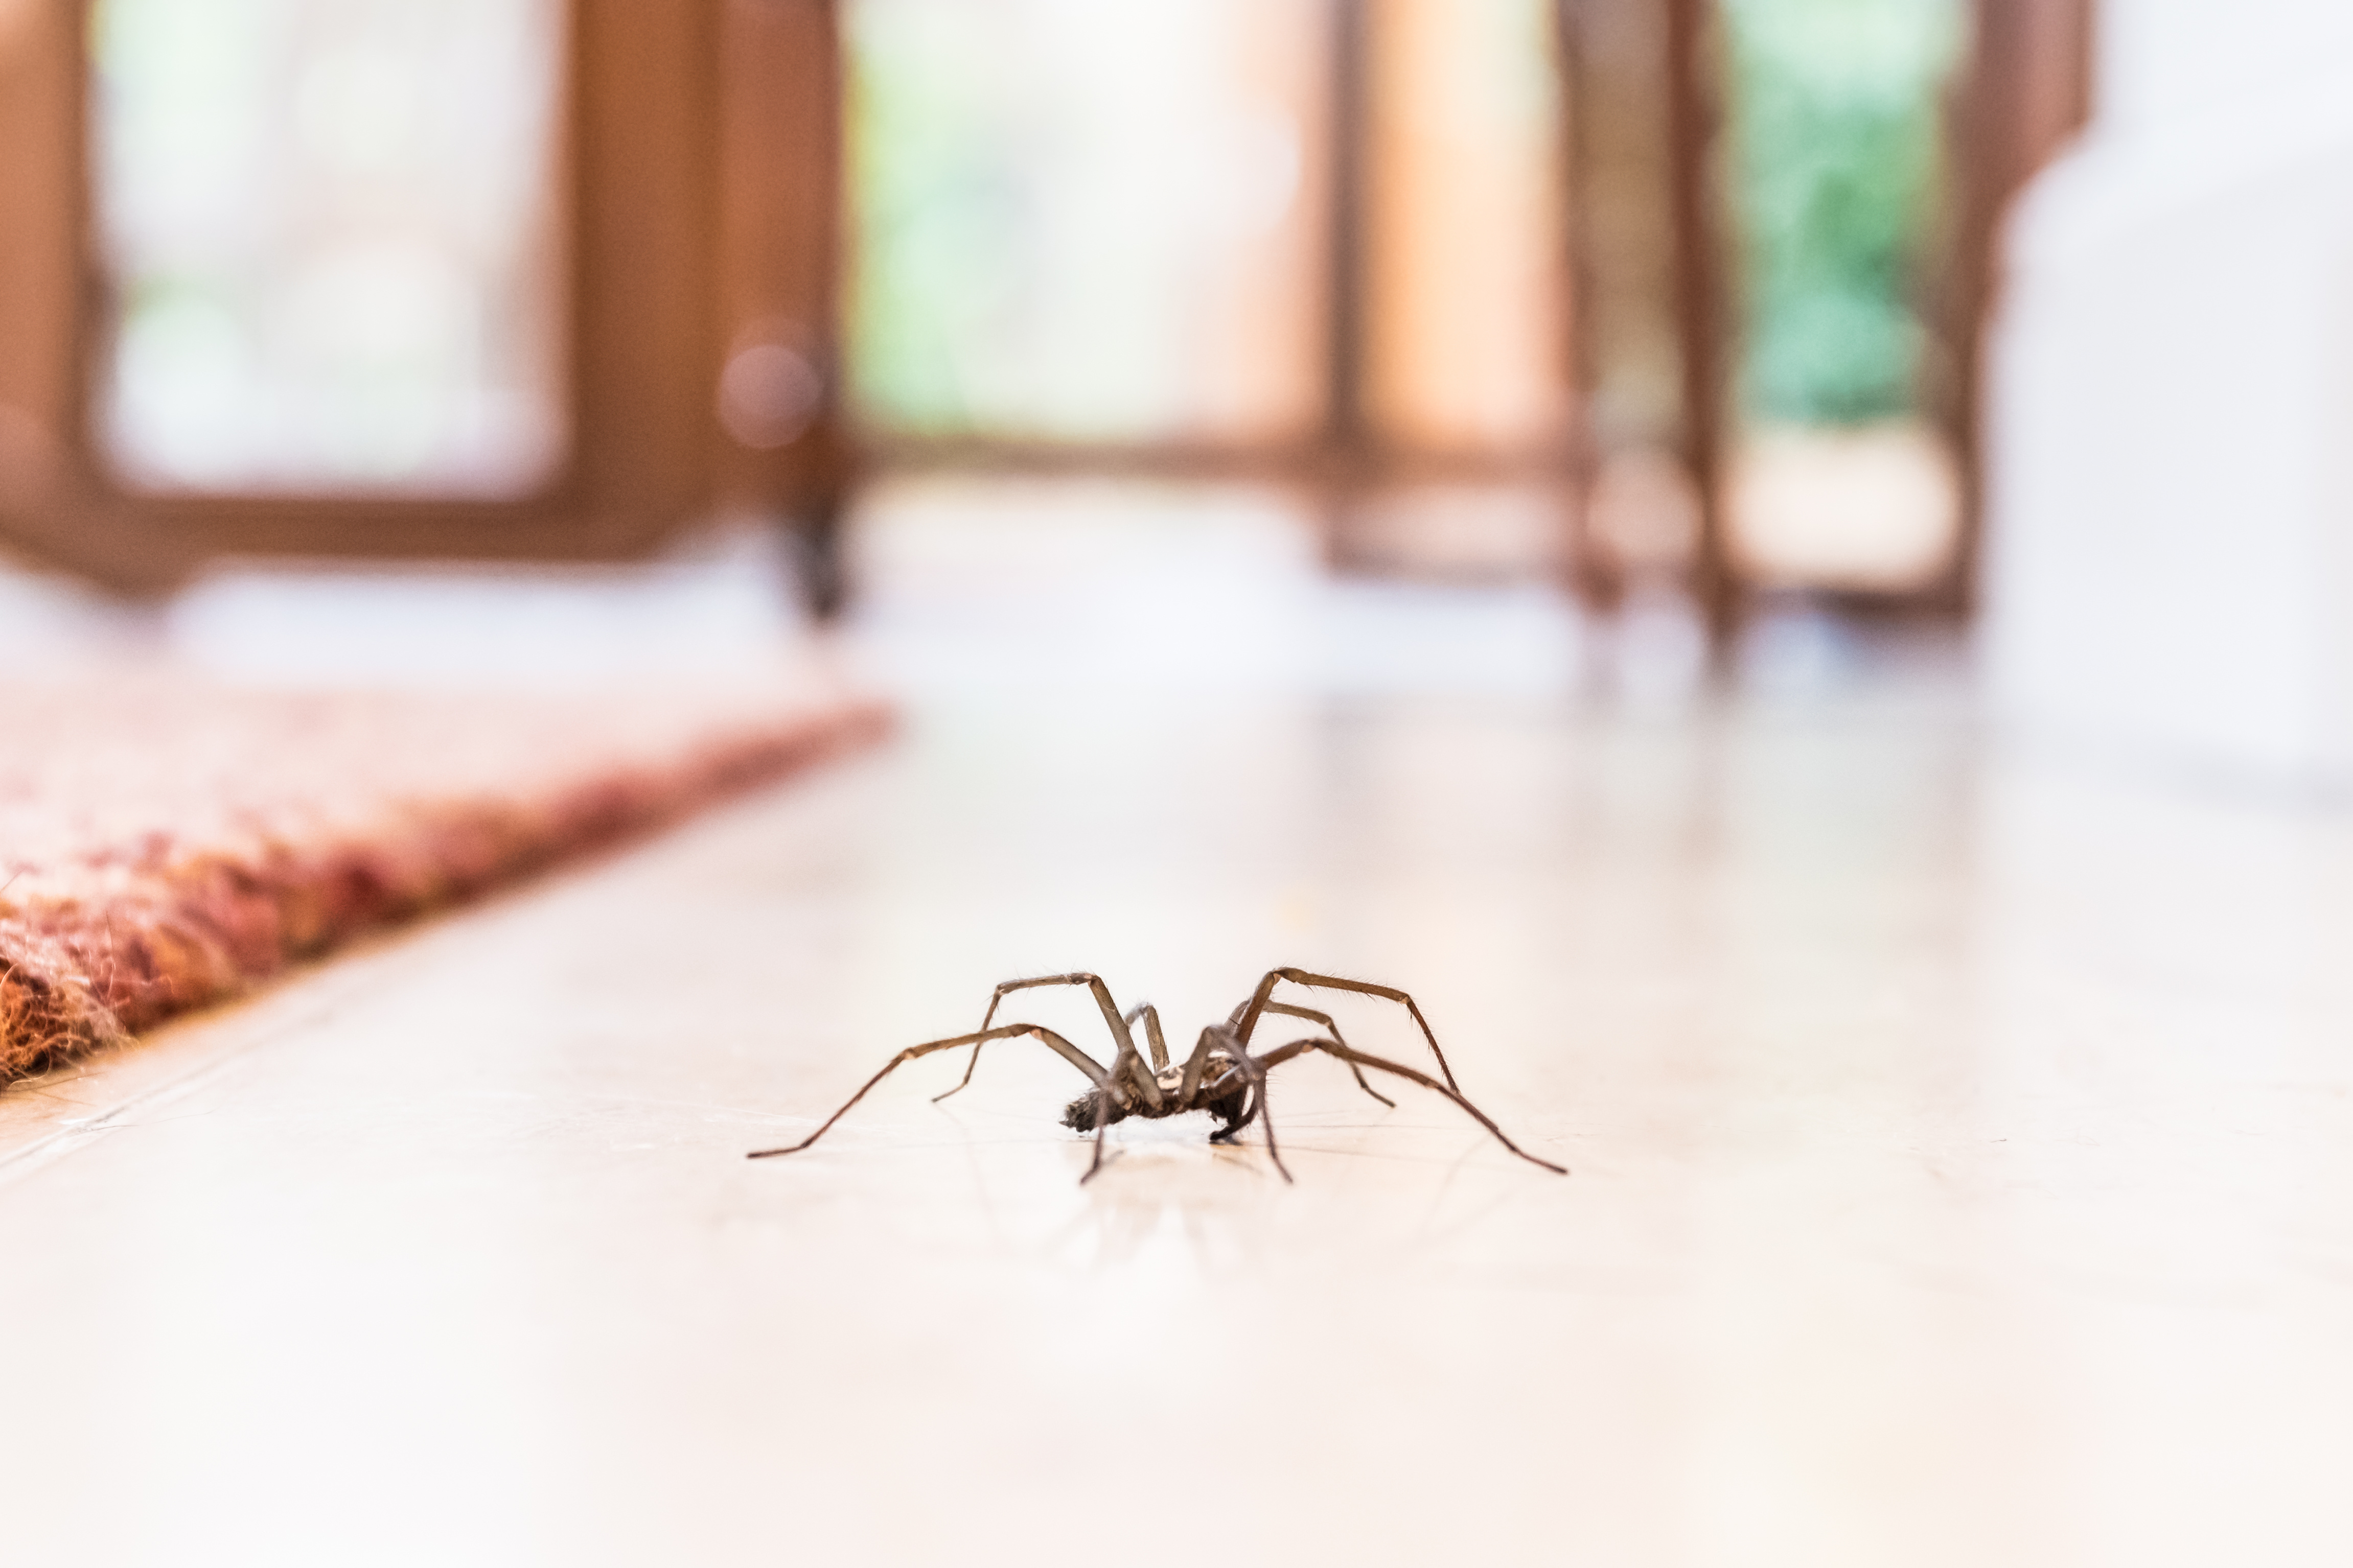 A spider scuttling across a hardwood floor - contact GGA Pest Management Killeen today for professional spider removal.